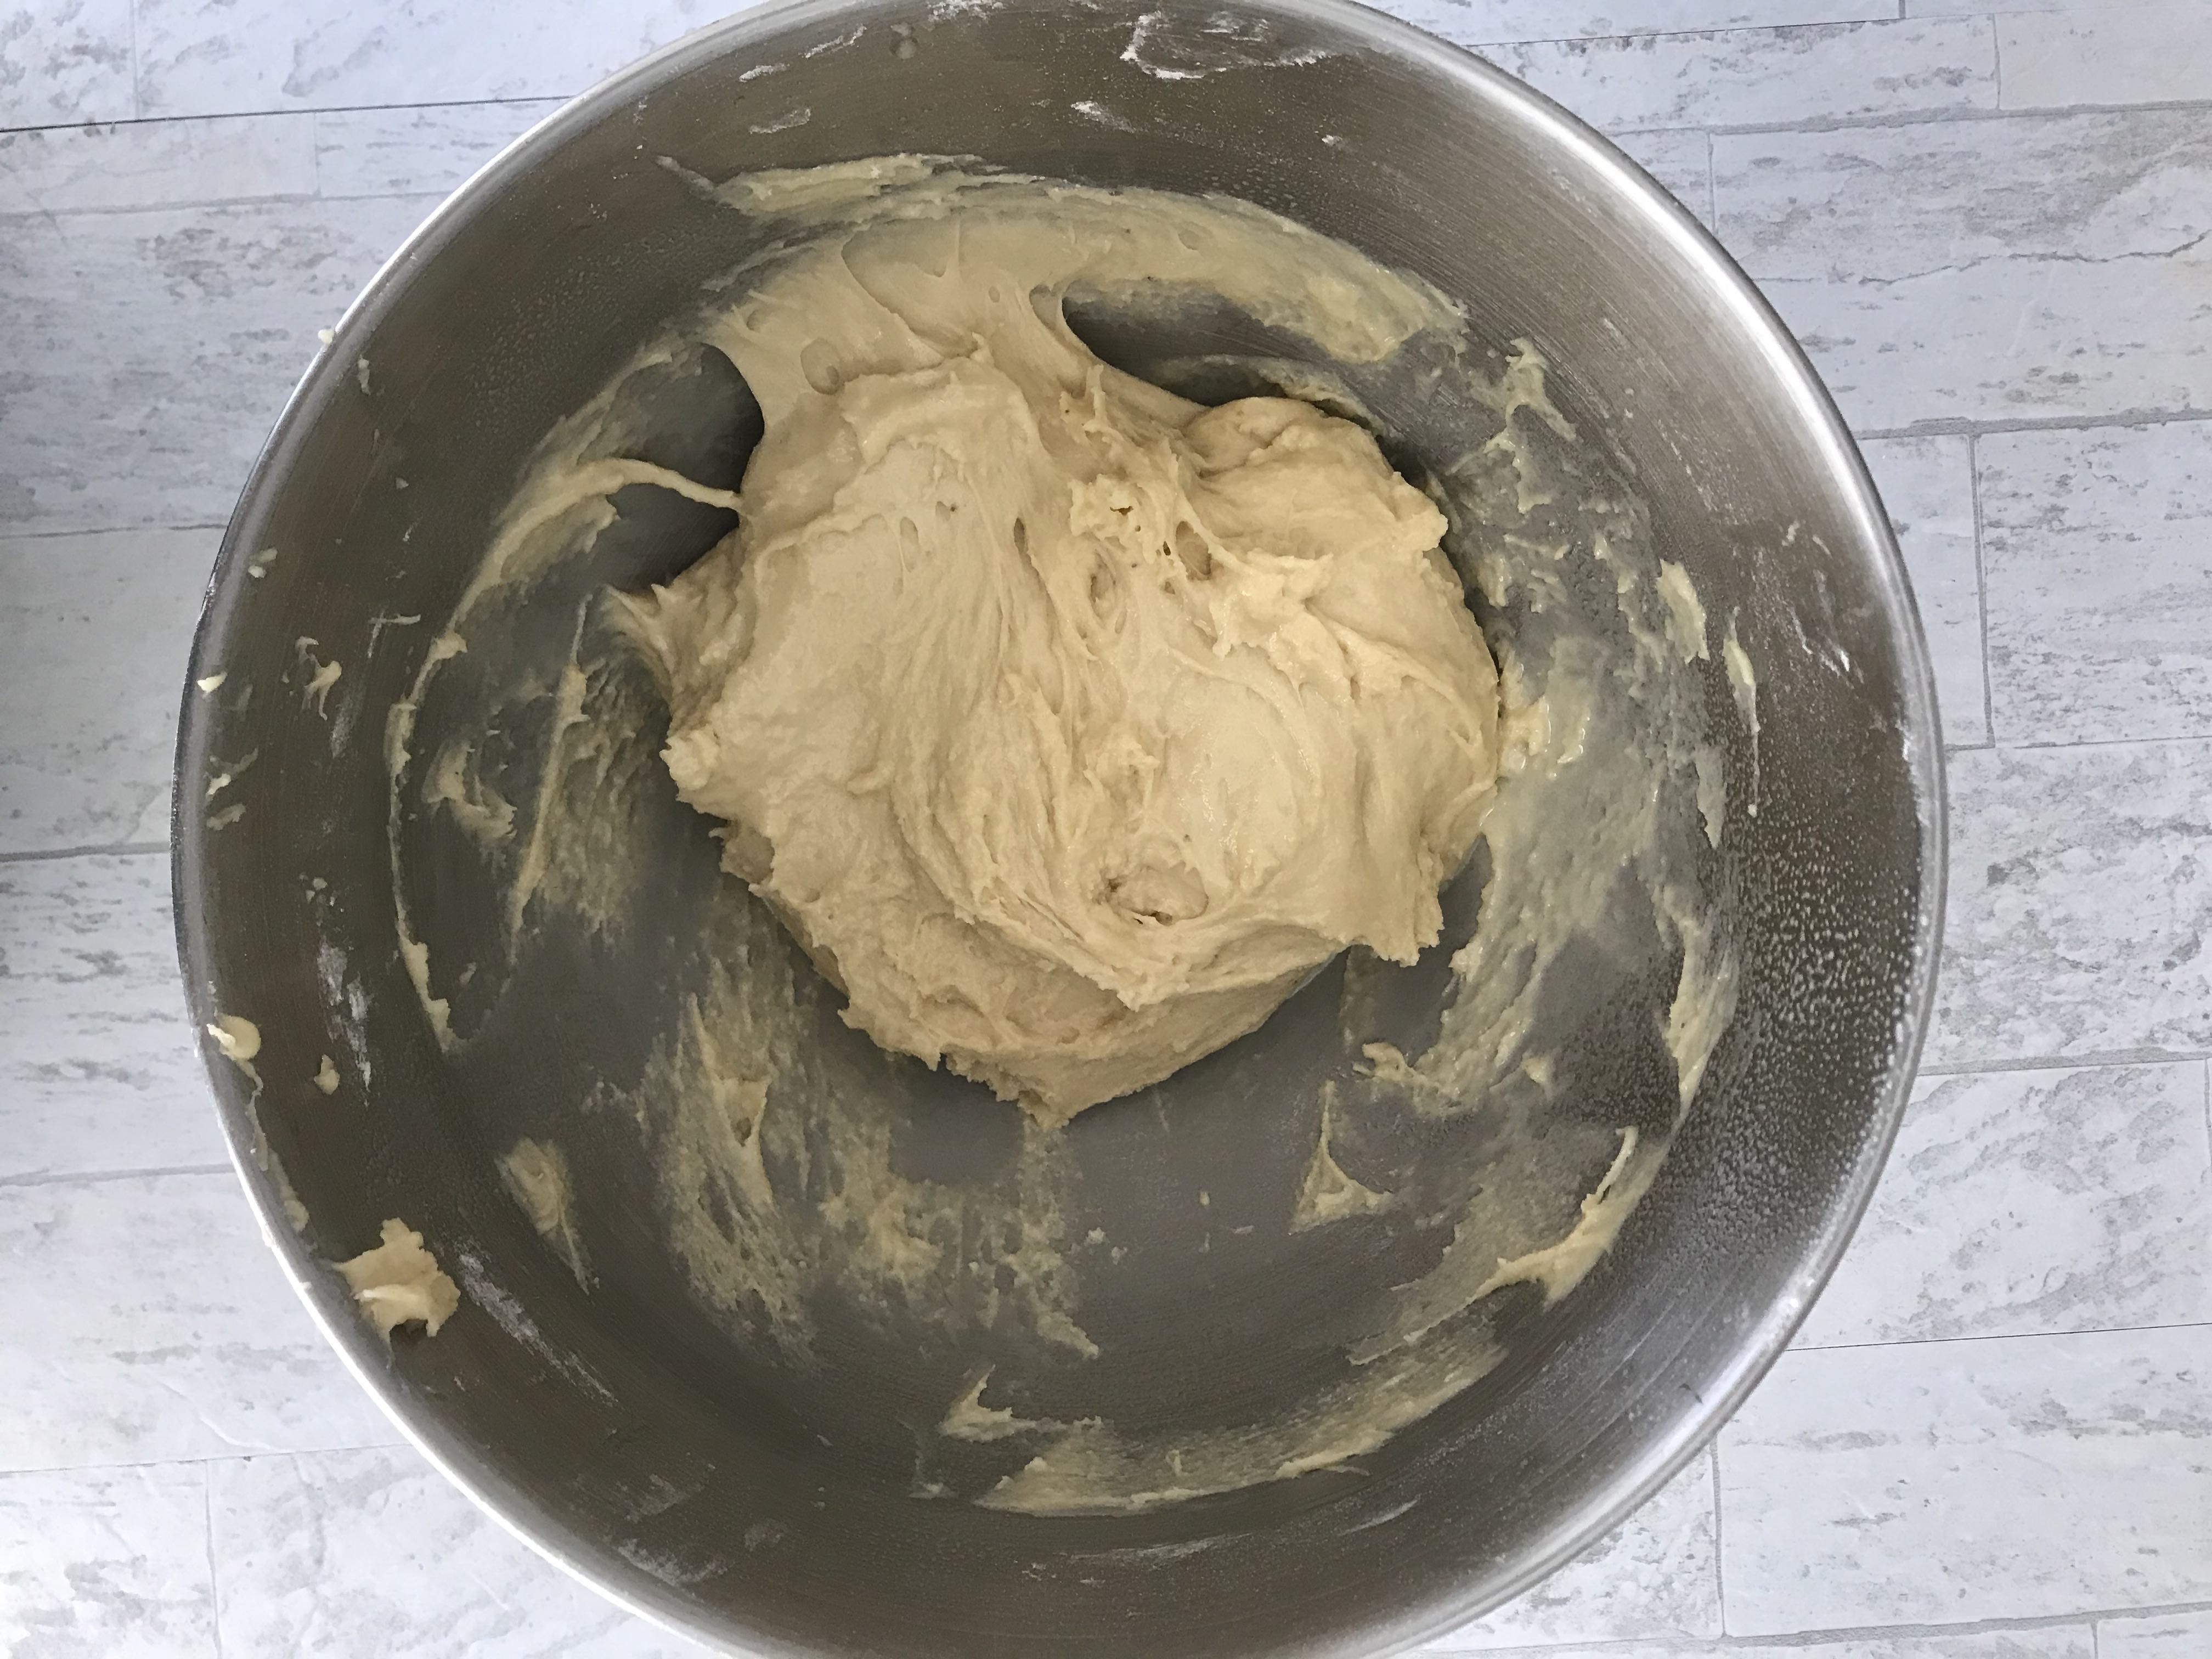 Soft dough after mixed in bowl